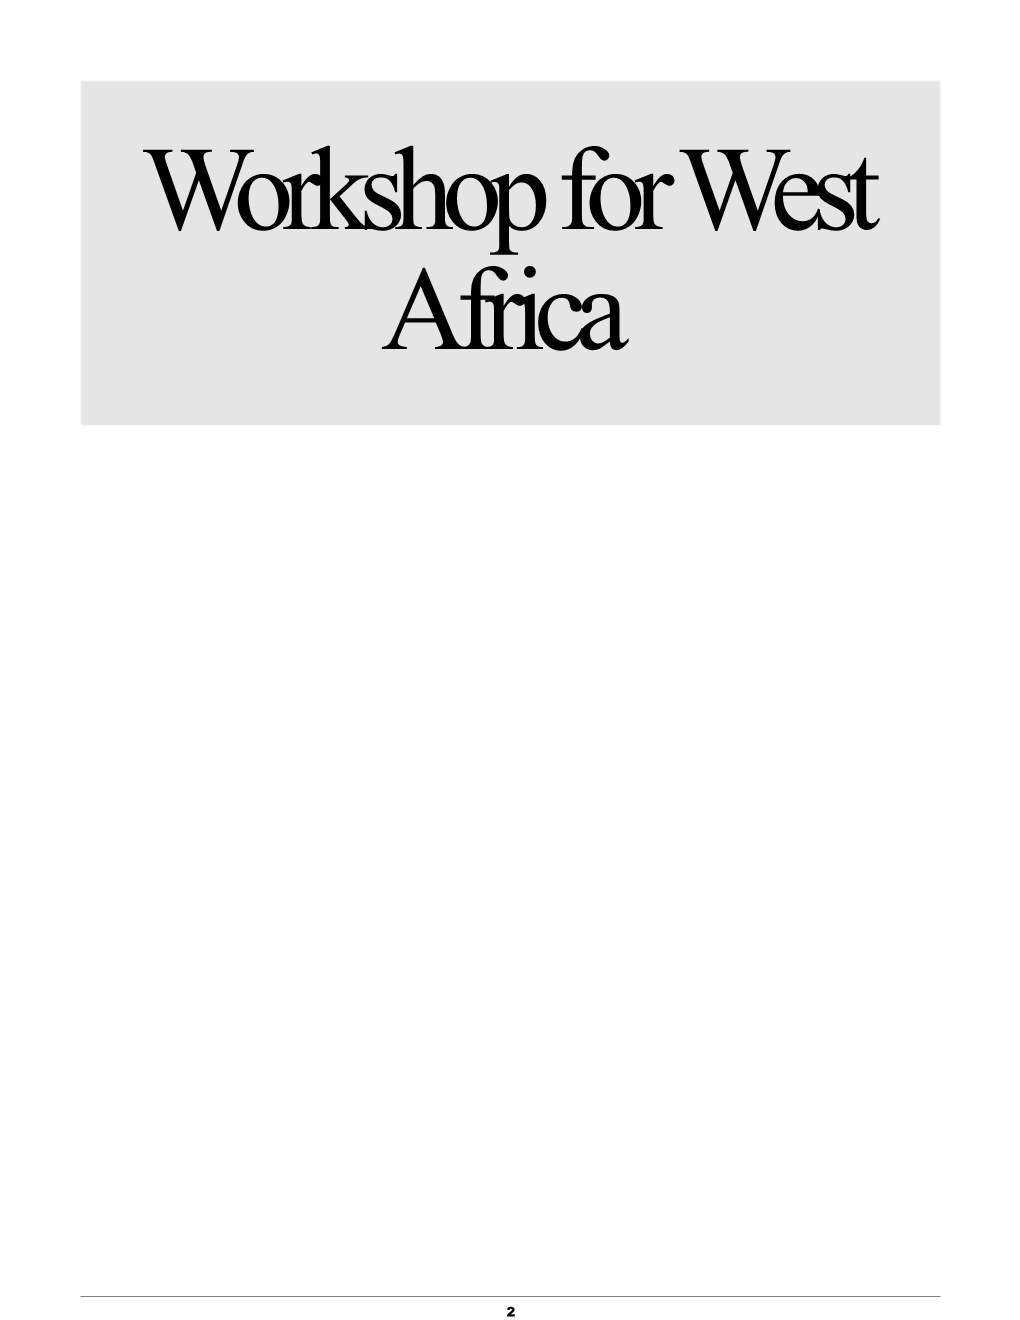 Primary Eye Care Workshop for West Africa